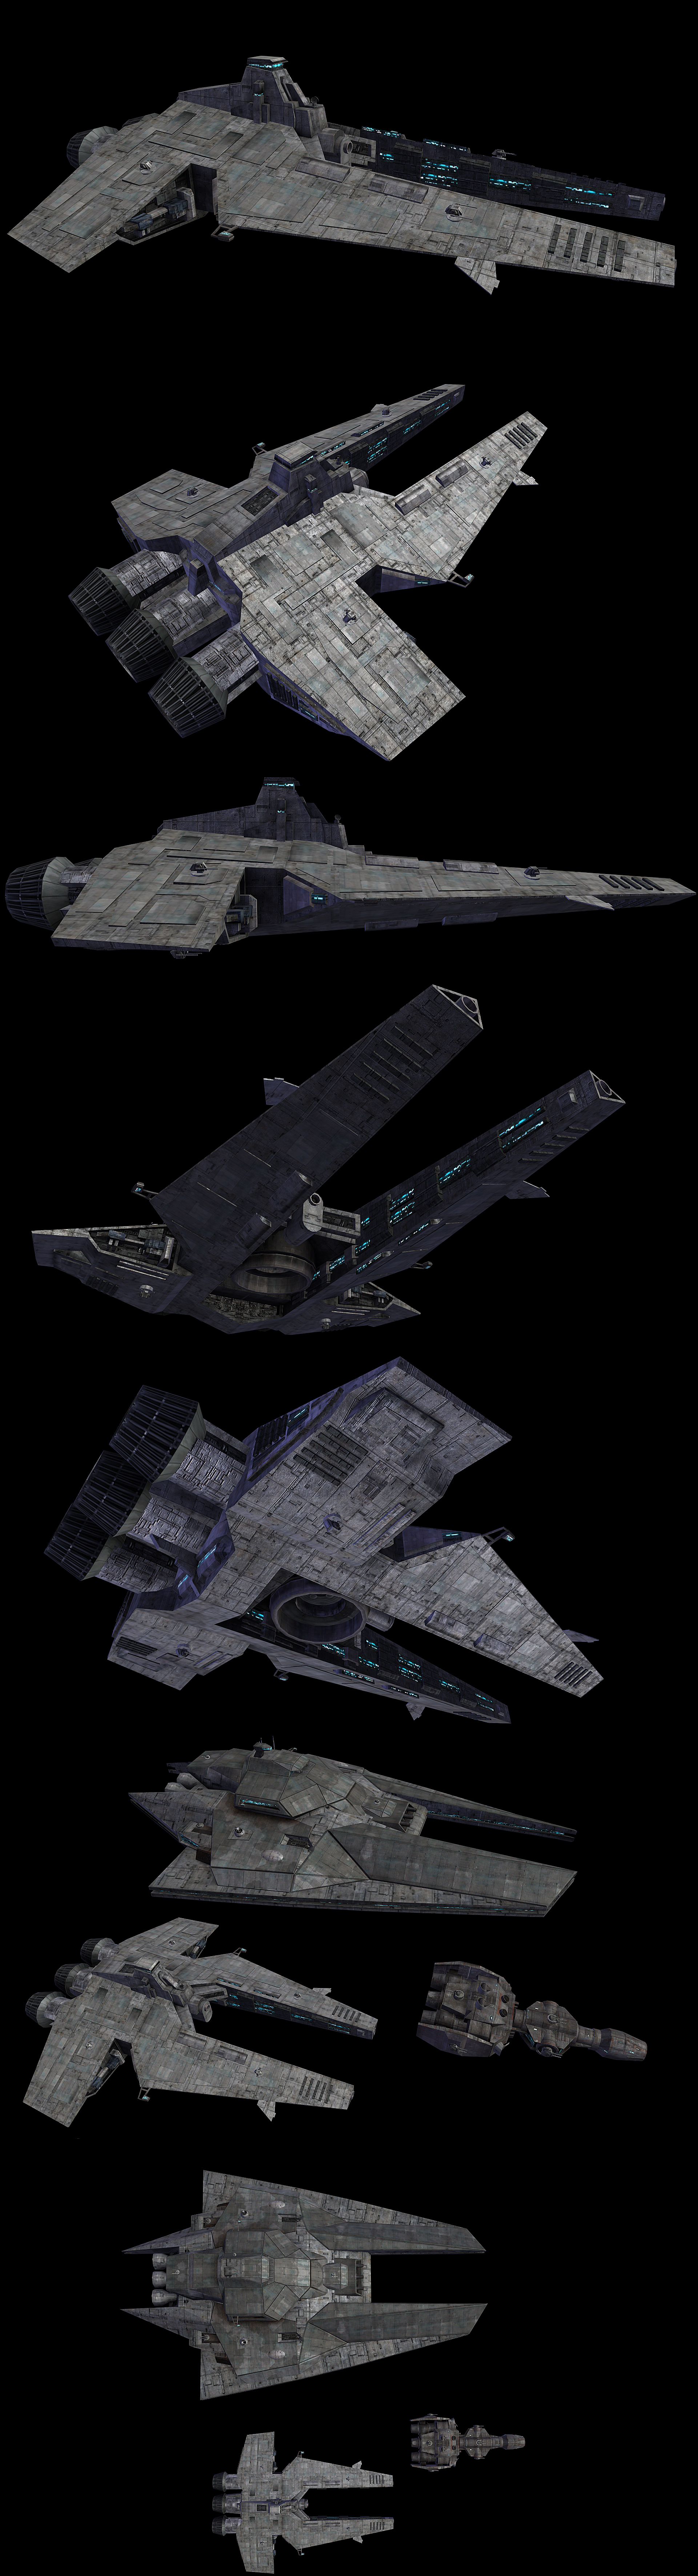 Imperial Customs Frigate image - Yuuzhan Vong at War mod for Star Wars ...